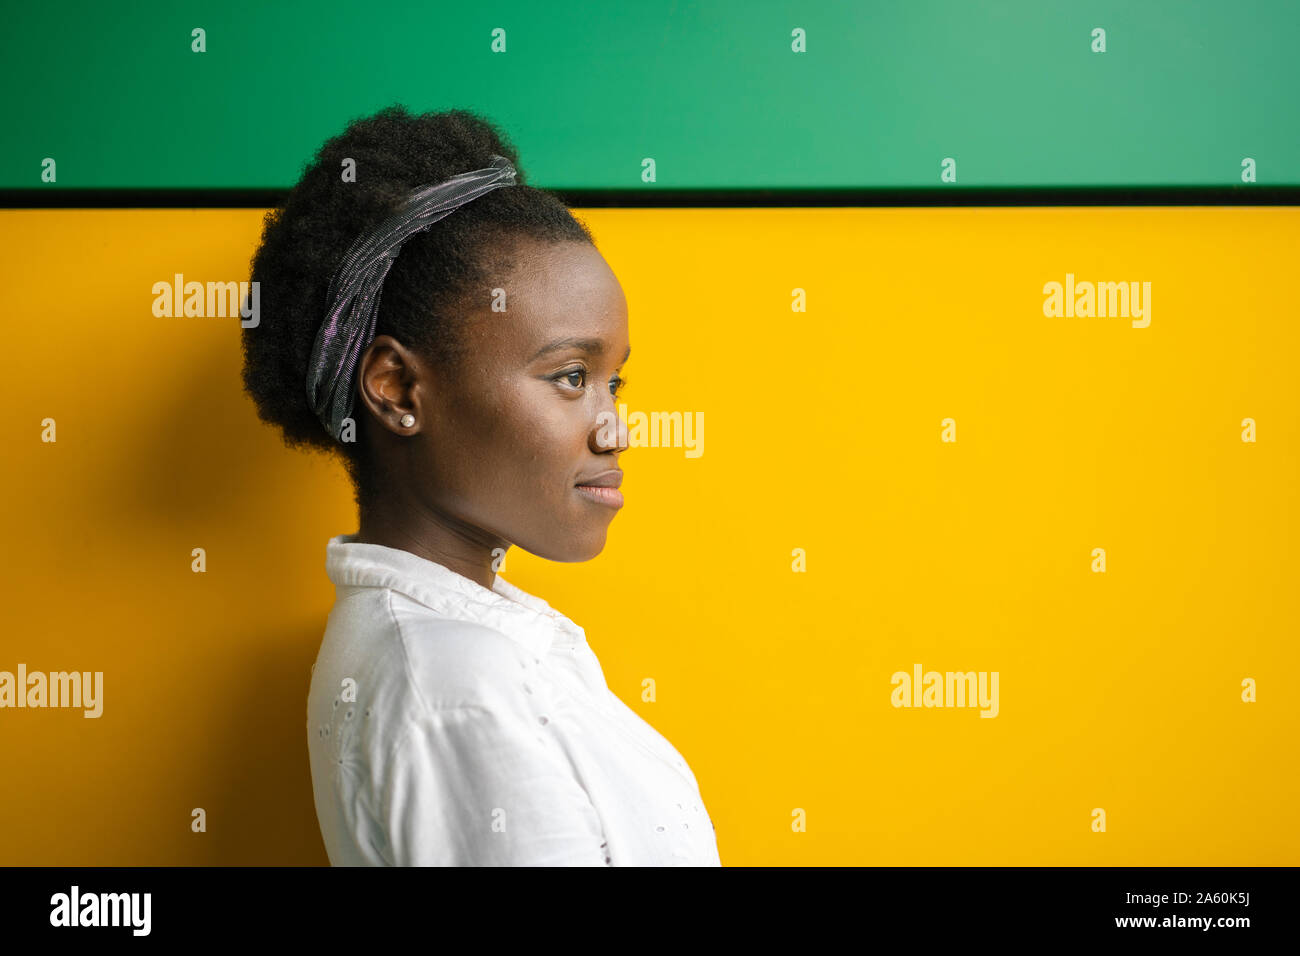 Portrait of young woman in front of yellow and green wall looking at distance Stock Photo